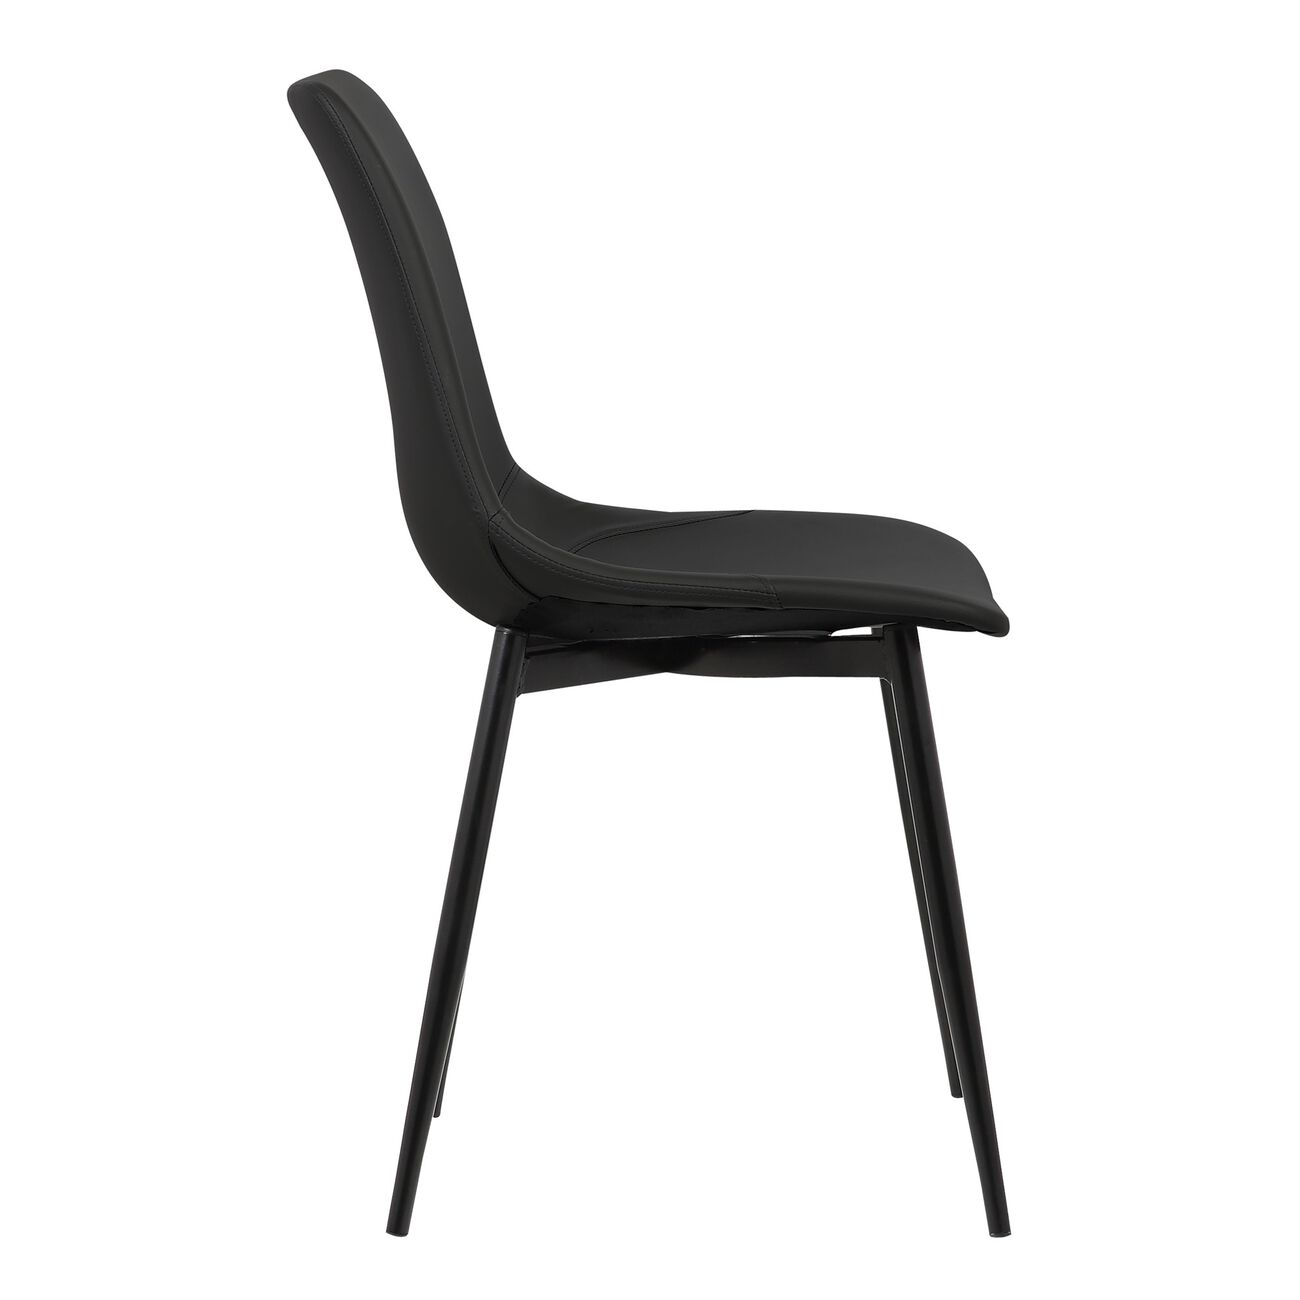 Leatherette Dining Chair with Bucket Seat and Metal Legs, Black